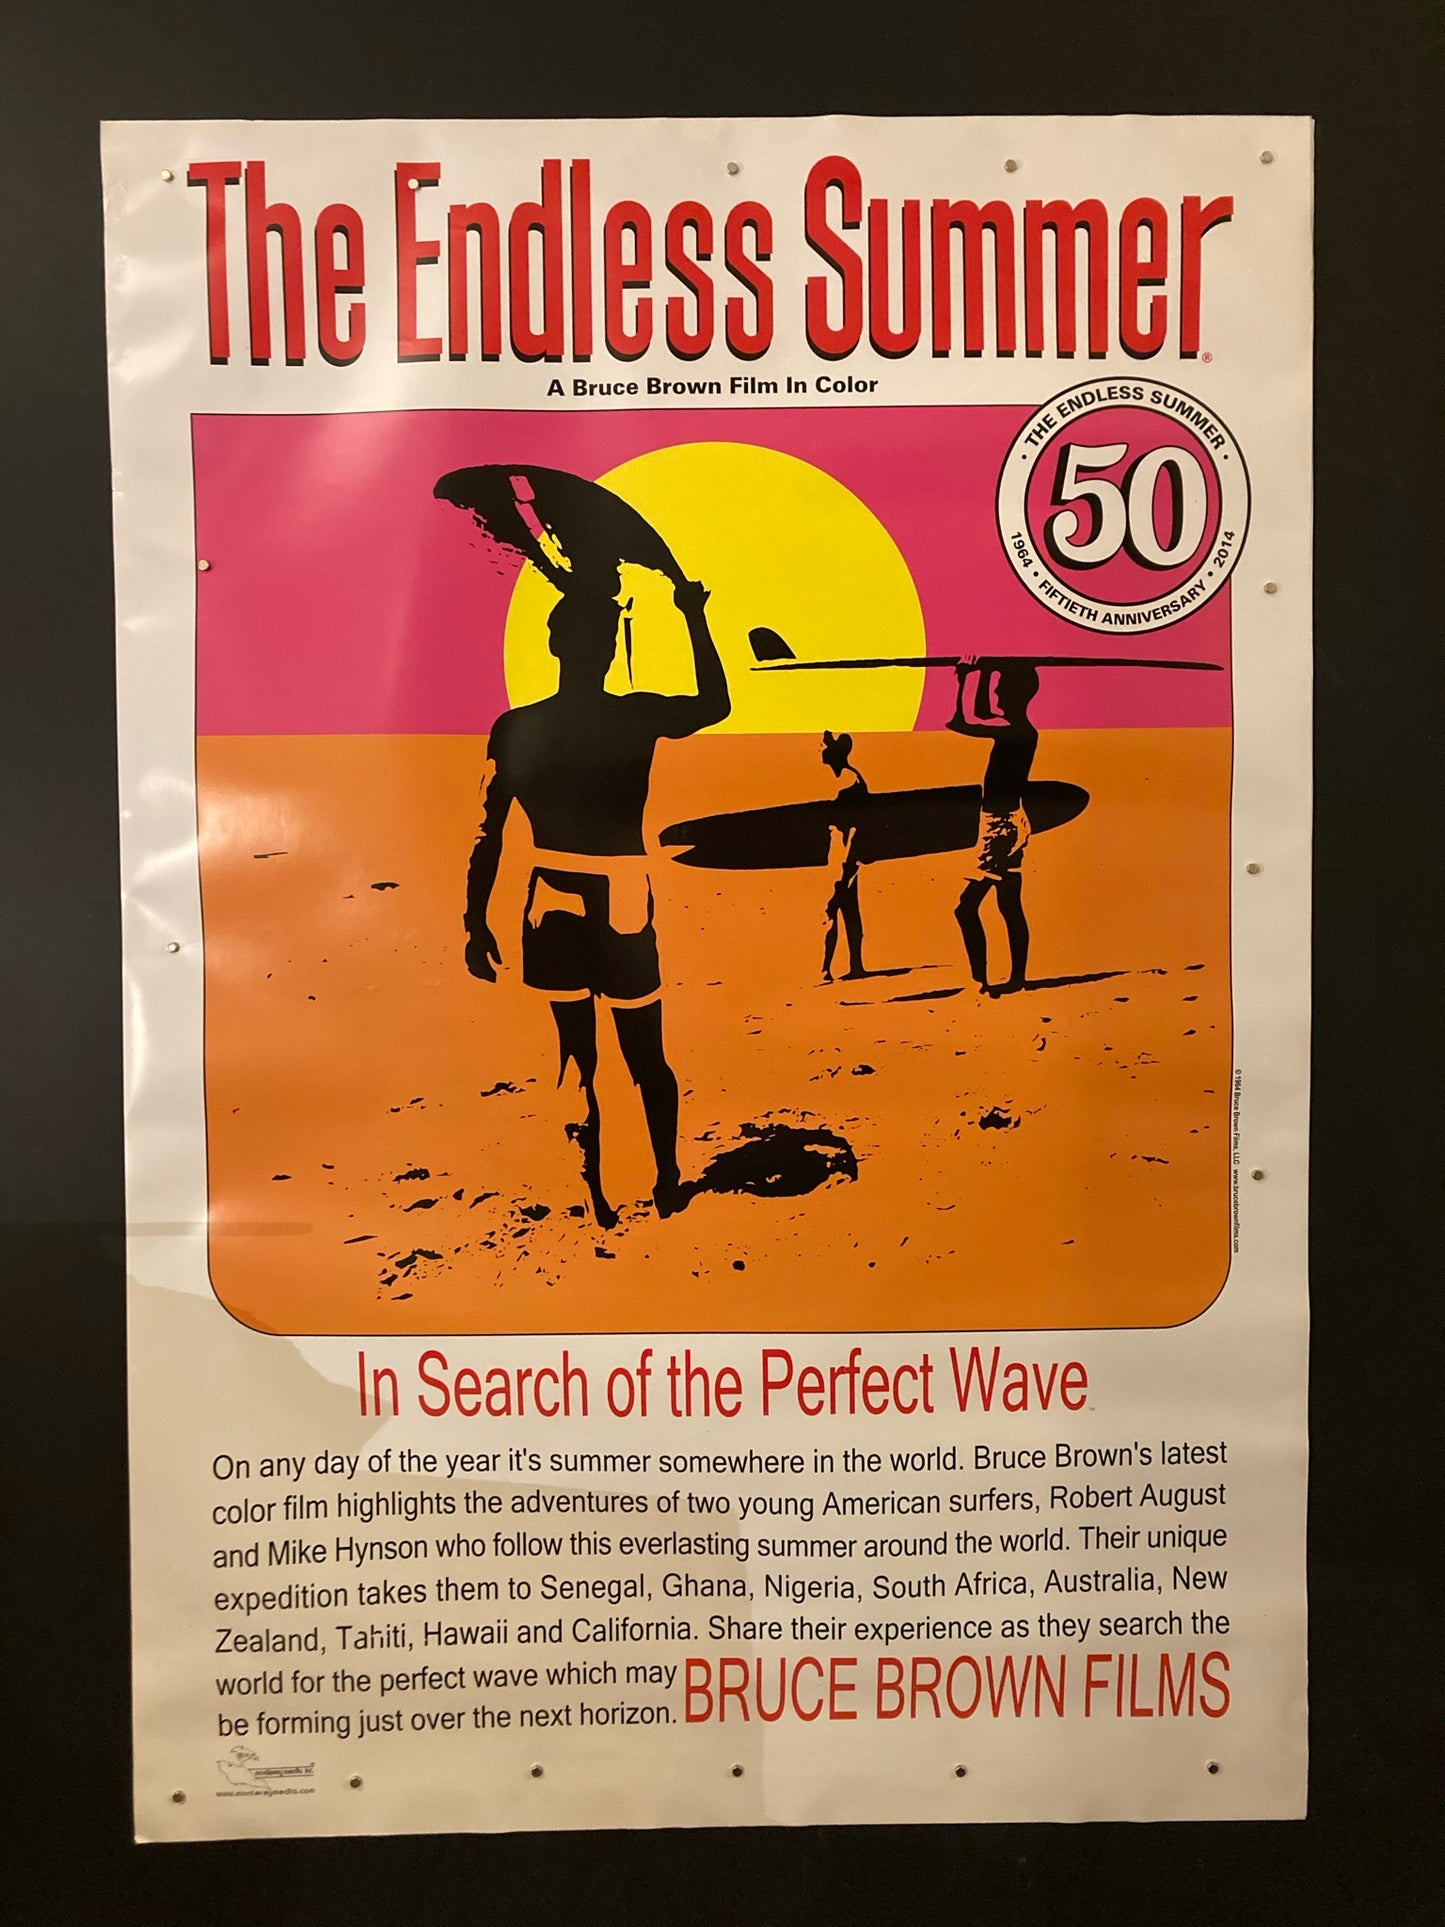 The Endless Summer